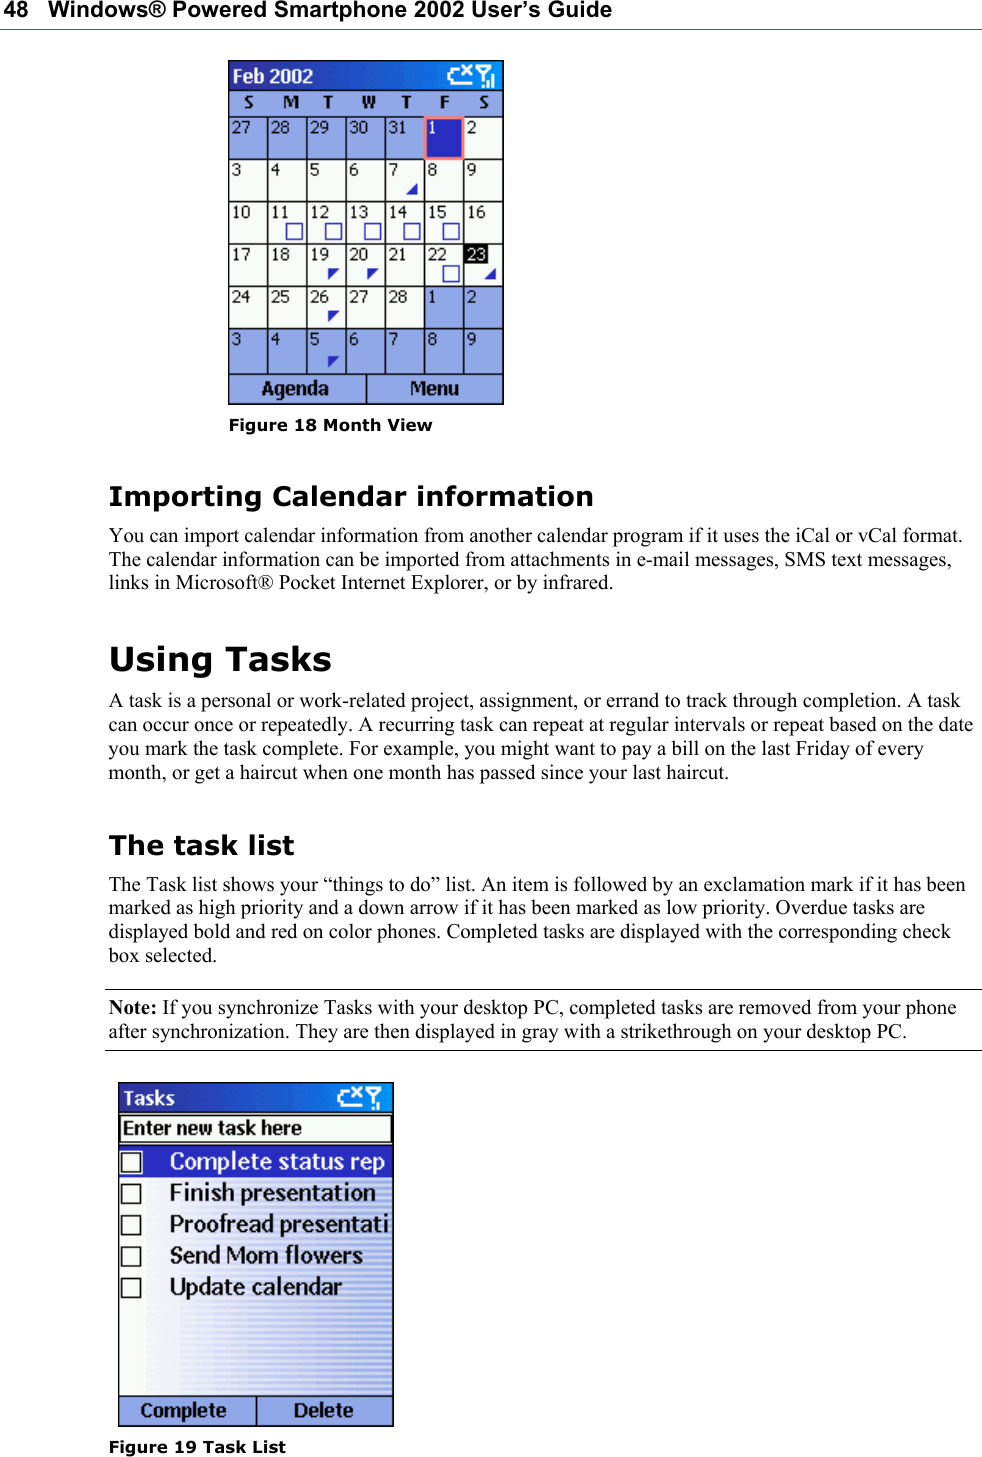 48   Windows® Powered Smartphone 2002 User’s Guide  Figure 18 Month View Importing Calendar information You can import calendar information from another calendar program if it uses the iCal or vCal format. The calendar information can be imported from attachments in e-mail messages, SMS text messages, links in Microsoft® Pocket Internet Explorer, or by infrared. Using Tasks A task is a personal or work-related project, assignment, or errand to track through completion. A task can occur once or repeatedly. A recurring task can repeat at regular intervals or repeat based on the date you mark the task complete. For example, you might want to pay a bill on the last Friday of every month, or get a haircut when one month has passed since your last haircut. The task list The Task list shows your “things to do” list. An item is followed by an exclamation mark if it has been marked as high priority and a down arrow if it has been marked as low priority. Overdue tasks are displayed bold and red on color phones. Completed tasks are displayed with the corresponding check box selected. Note: If you synchronize Tasks with your desktop PC, completed tasks are removed from your phone after synchronization. They are then displayed in gray with a strikethrough on your desktop PC.     Figure 19 Task List 